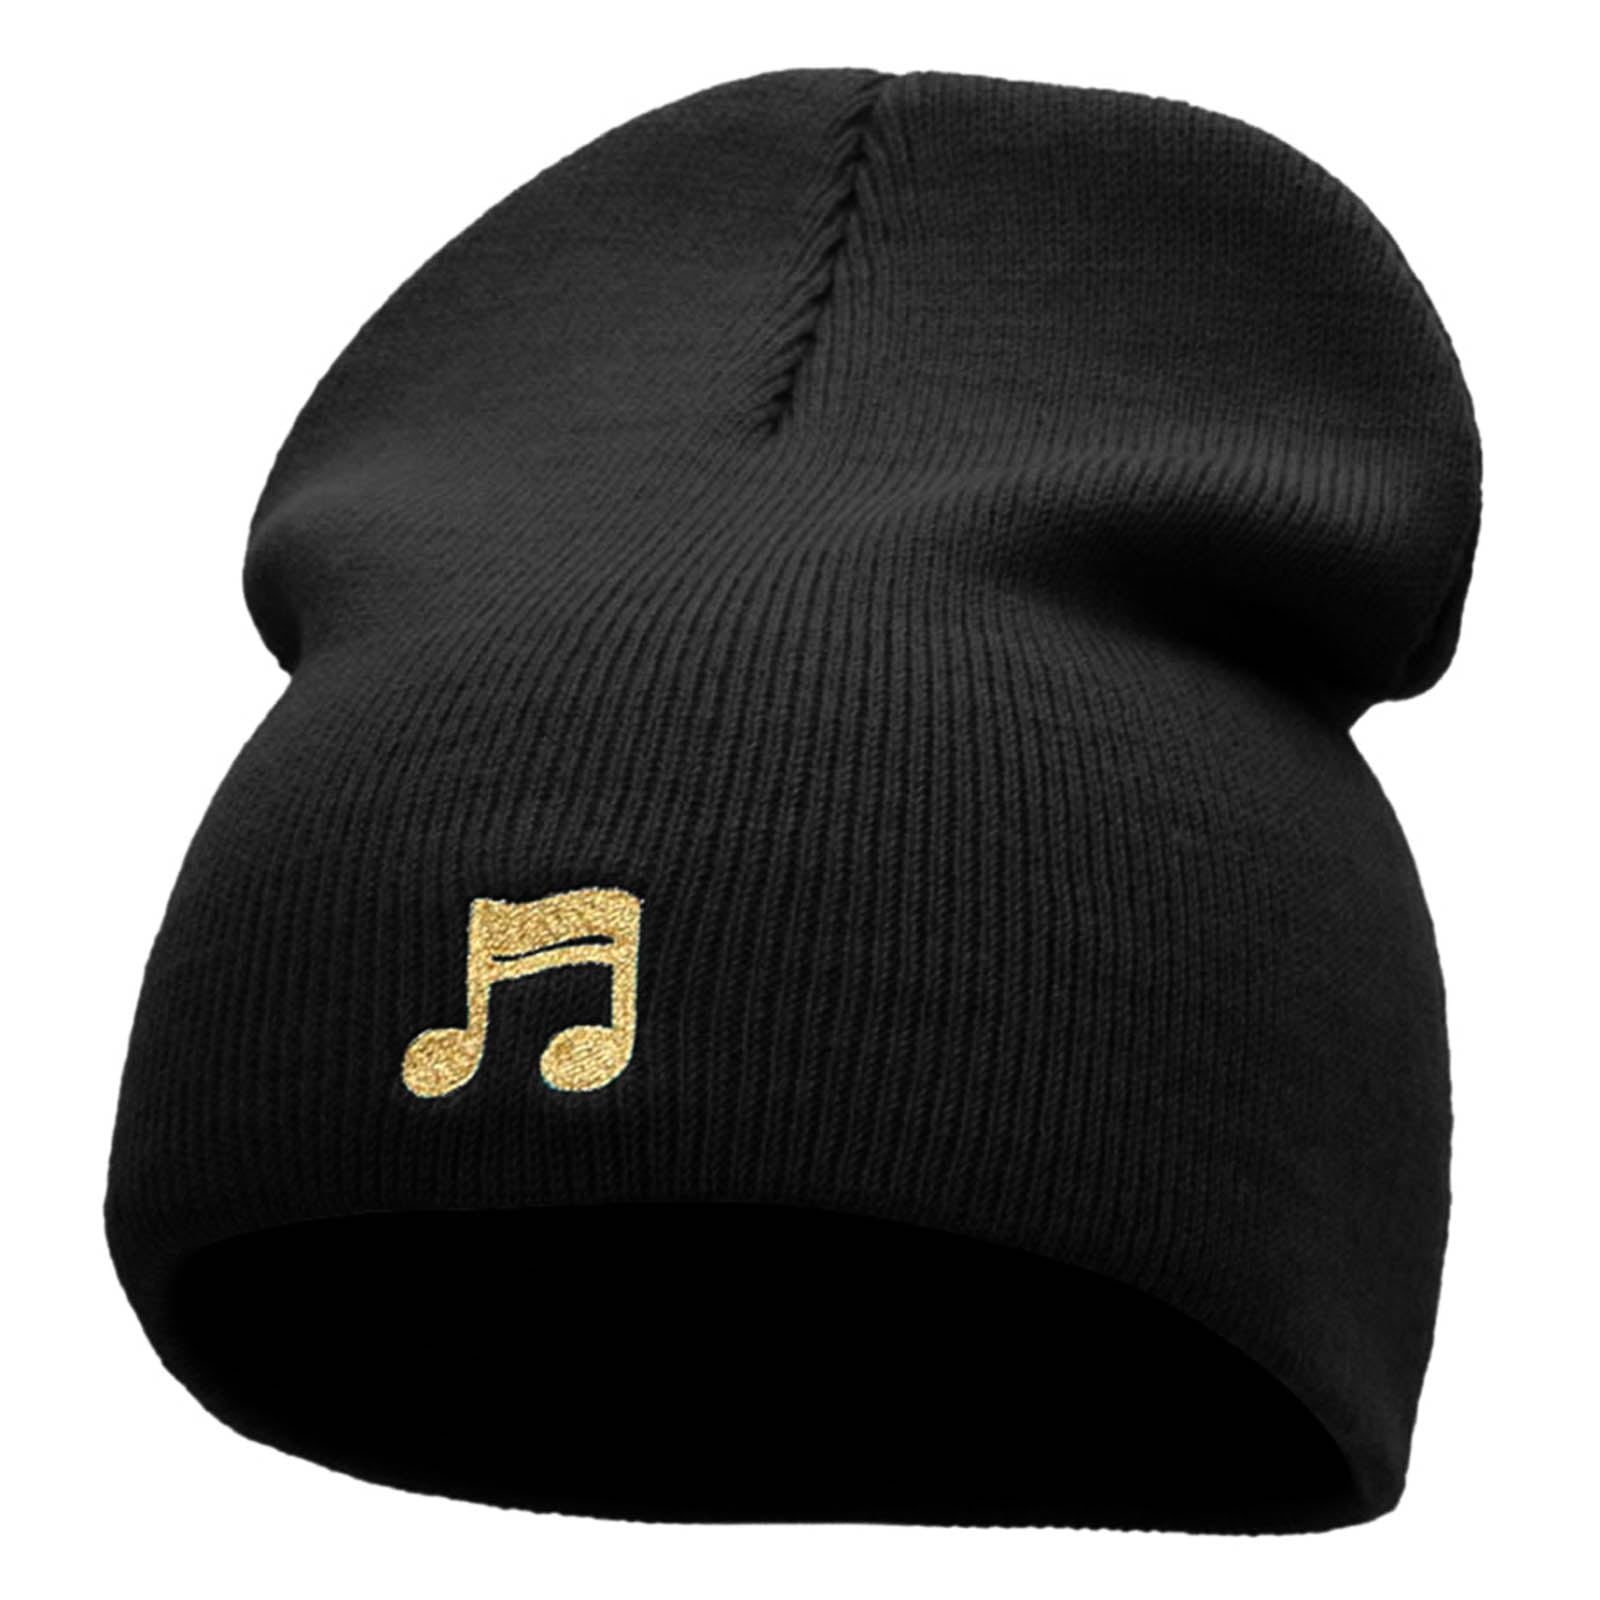 Beamed 16th Note Embroidered Short Beanie - Black OSFM